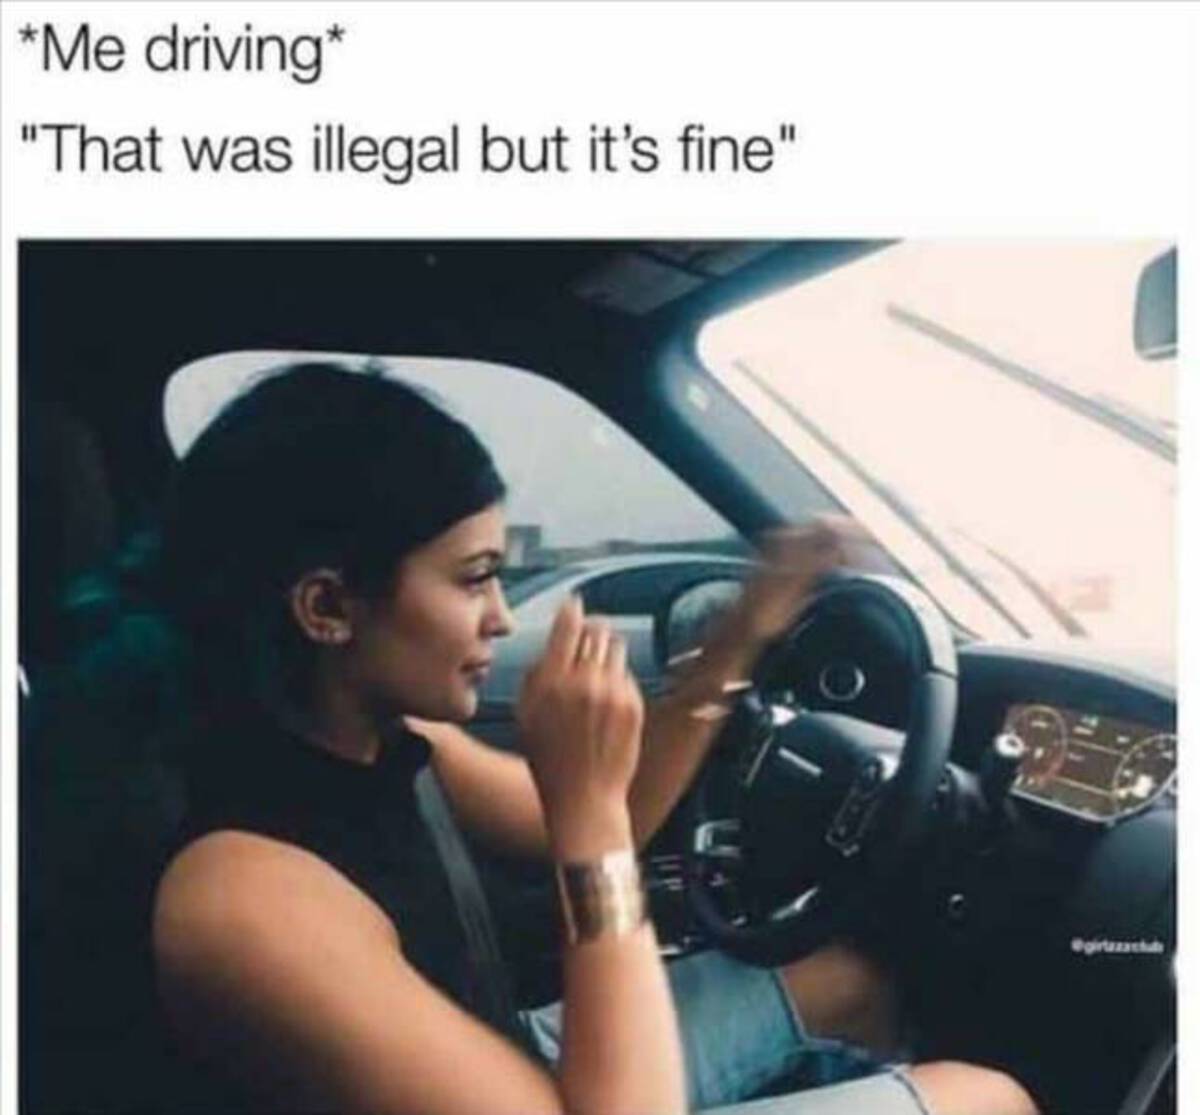 bad driving memes - Me driving "That was illegal but it's fine"